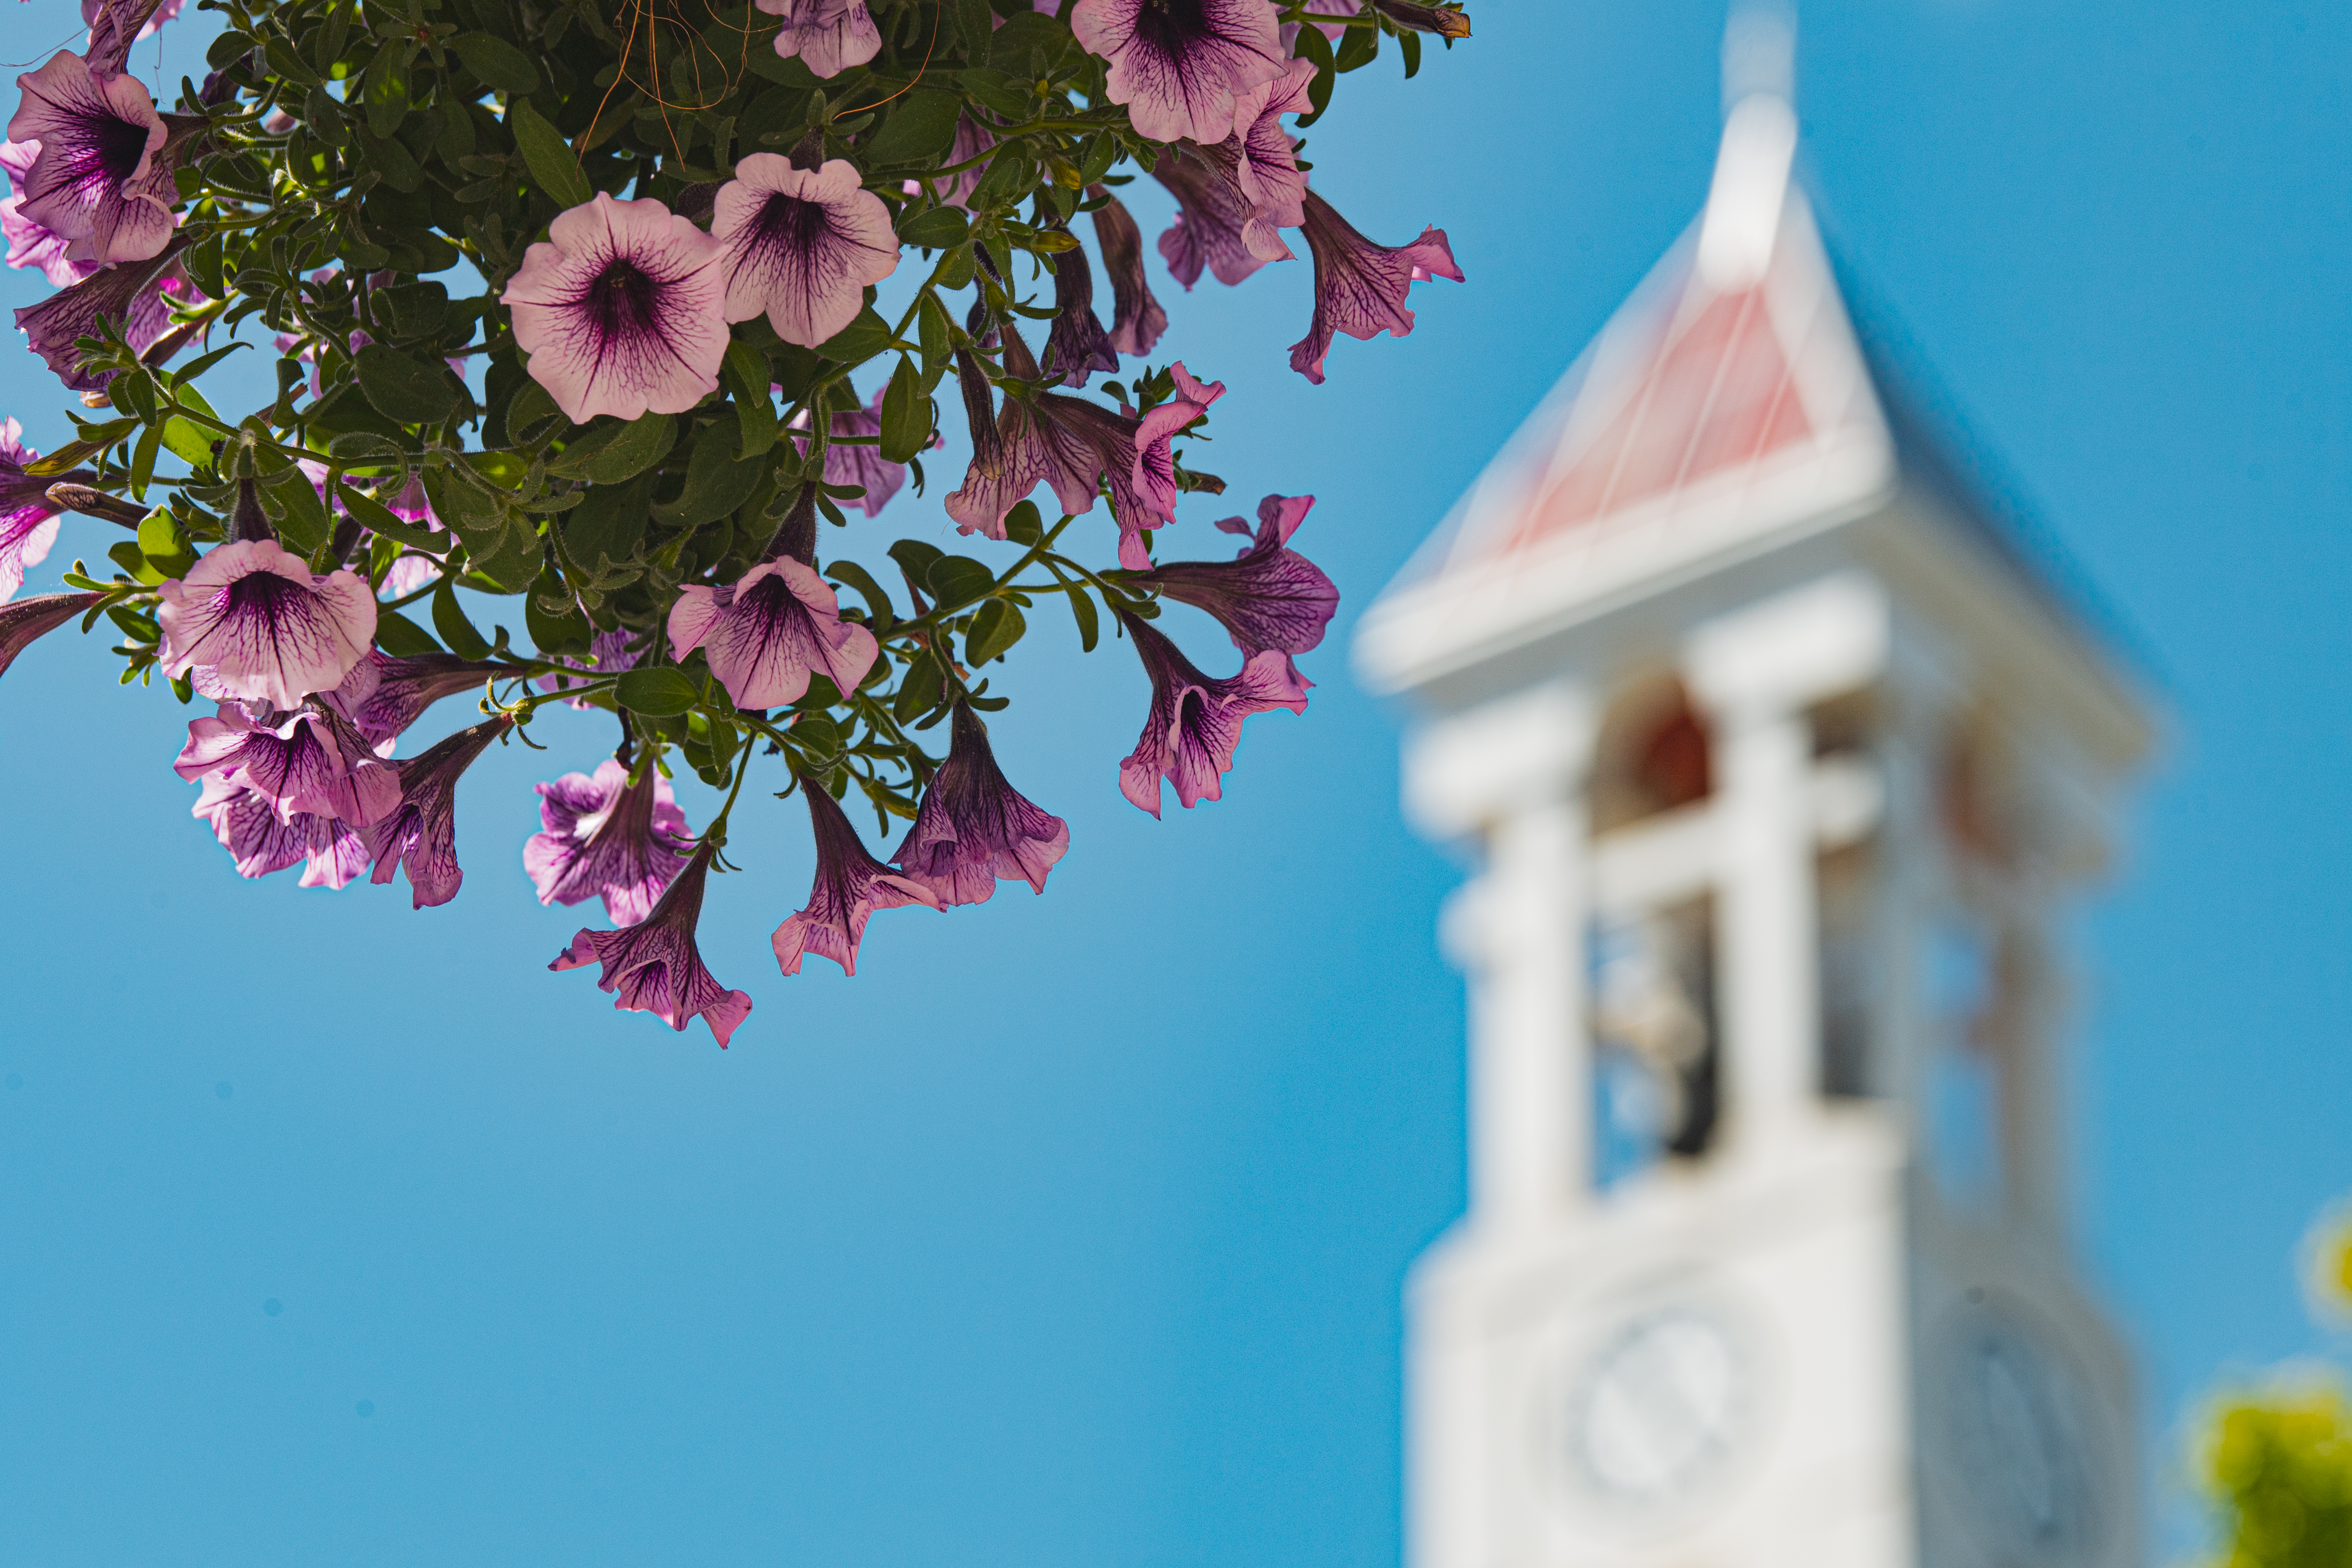 Purple flowers hanging in front of the Bell Tower